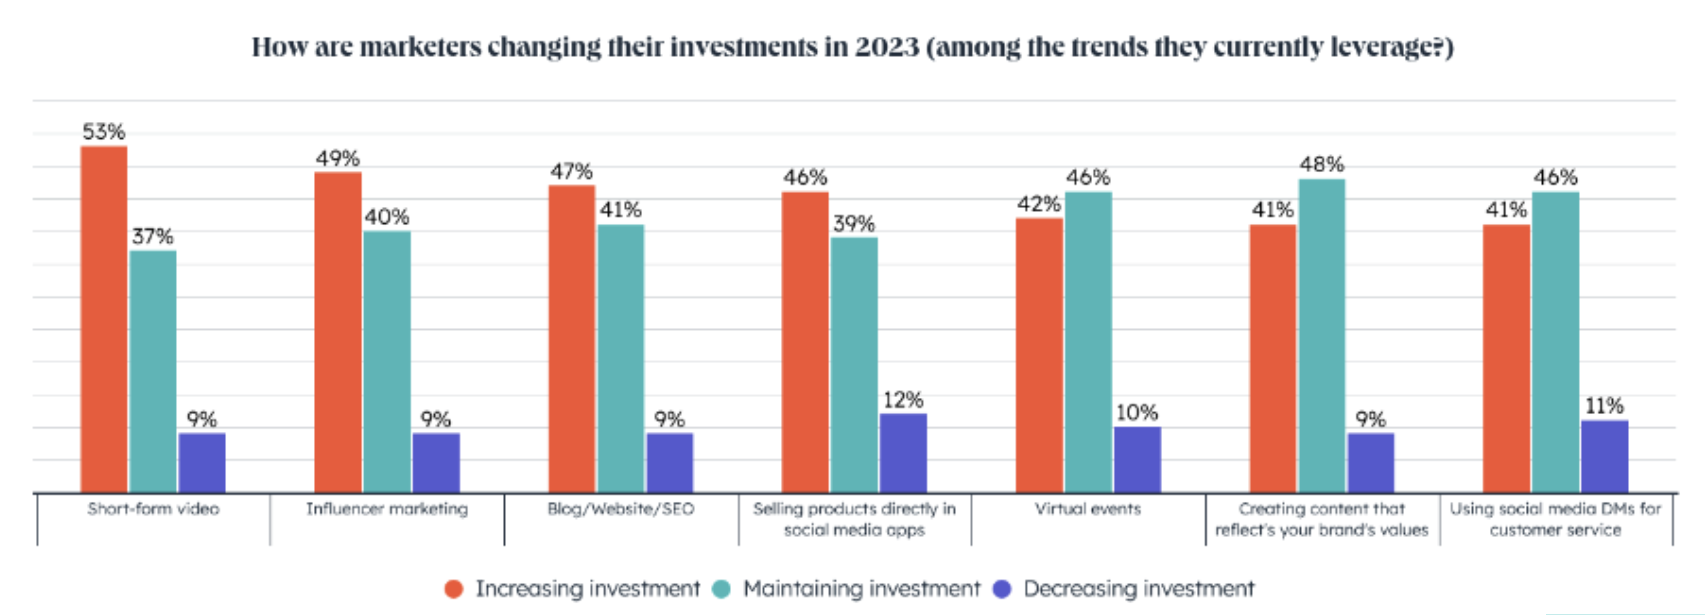 Graph showing how marketers are changing their investments in 2023, and creating content that showcases your values ​​is among the investments. 